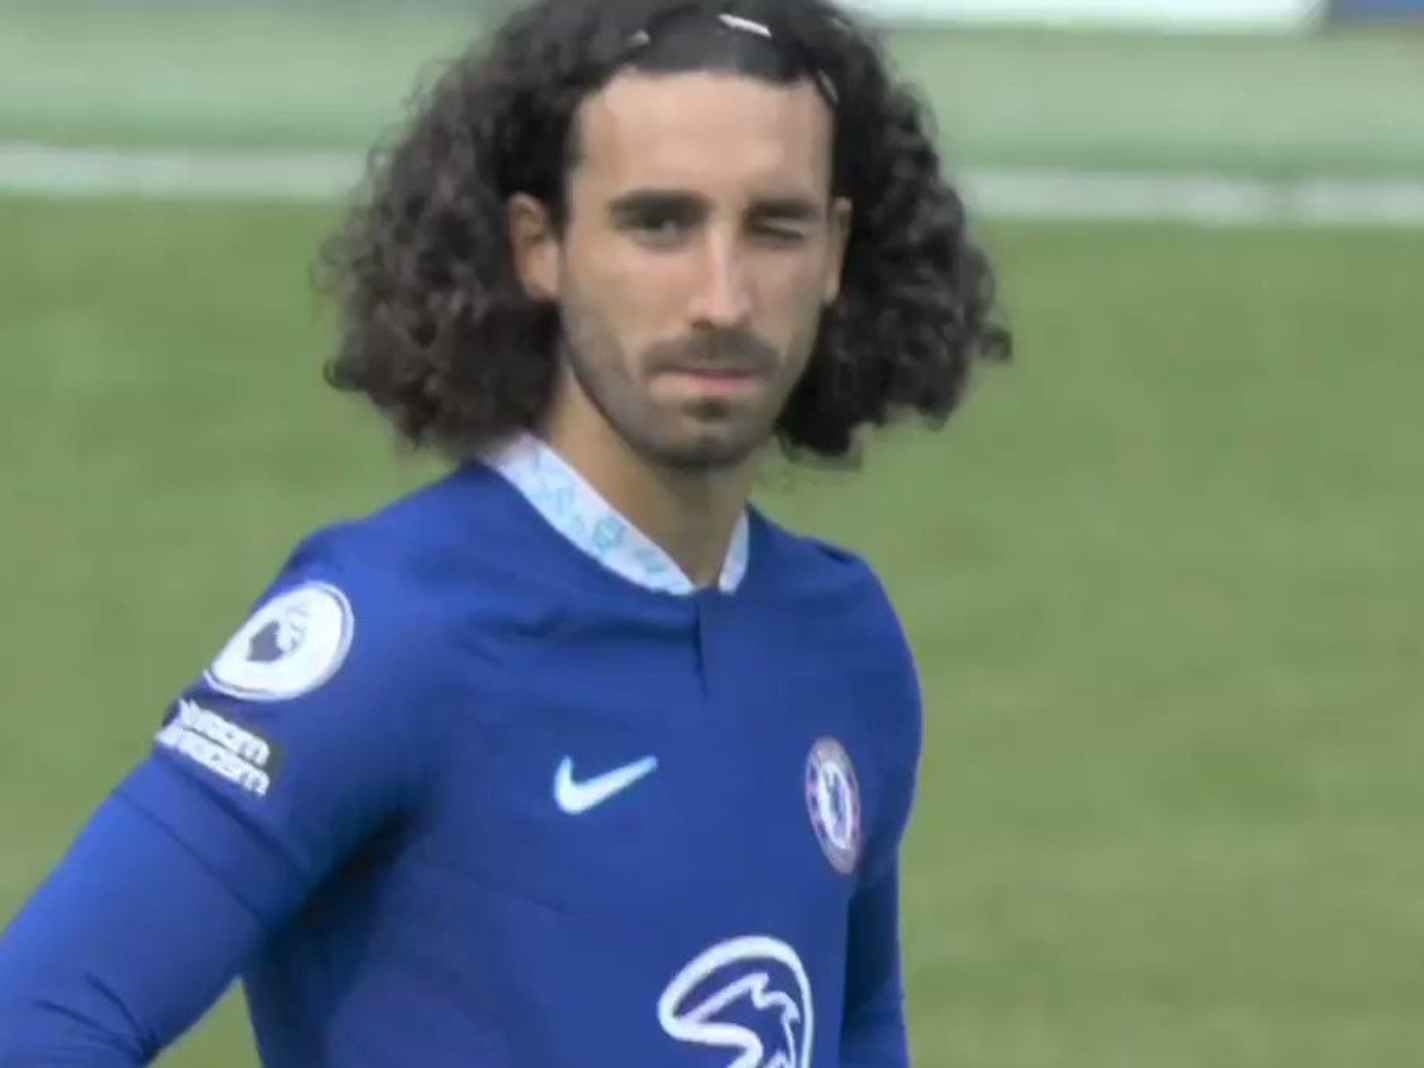 The Edgy New Hairstyle of Chelsea Defender Marc Cucurella: From Fluffy Locks to Braids